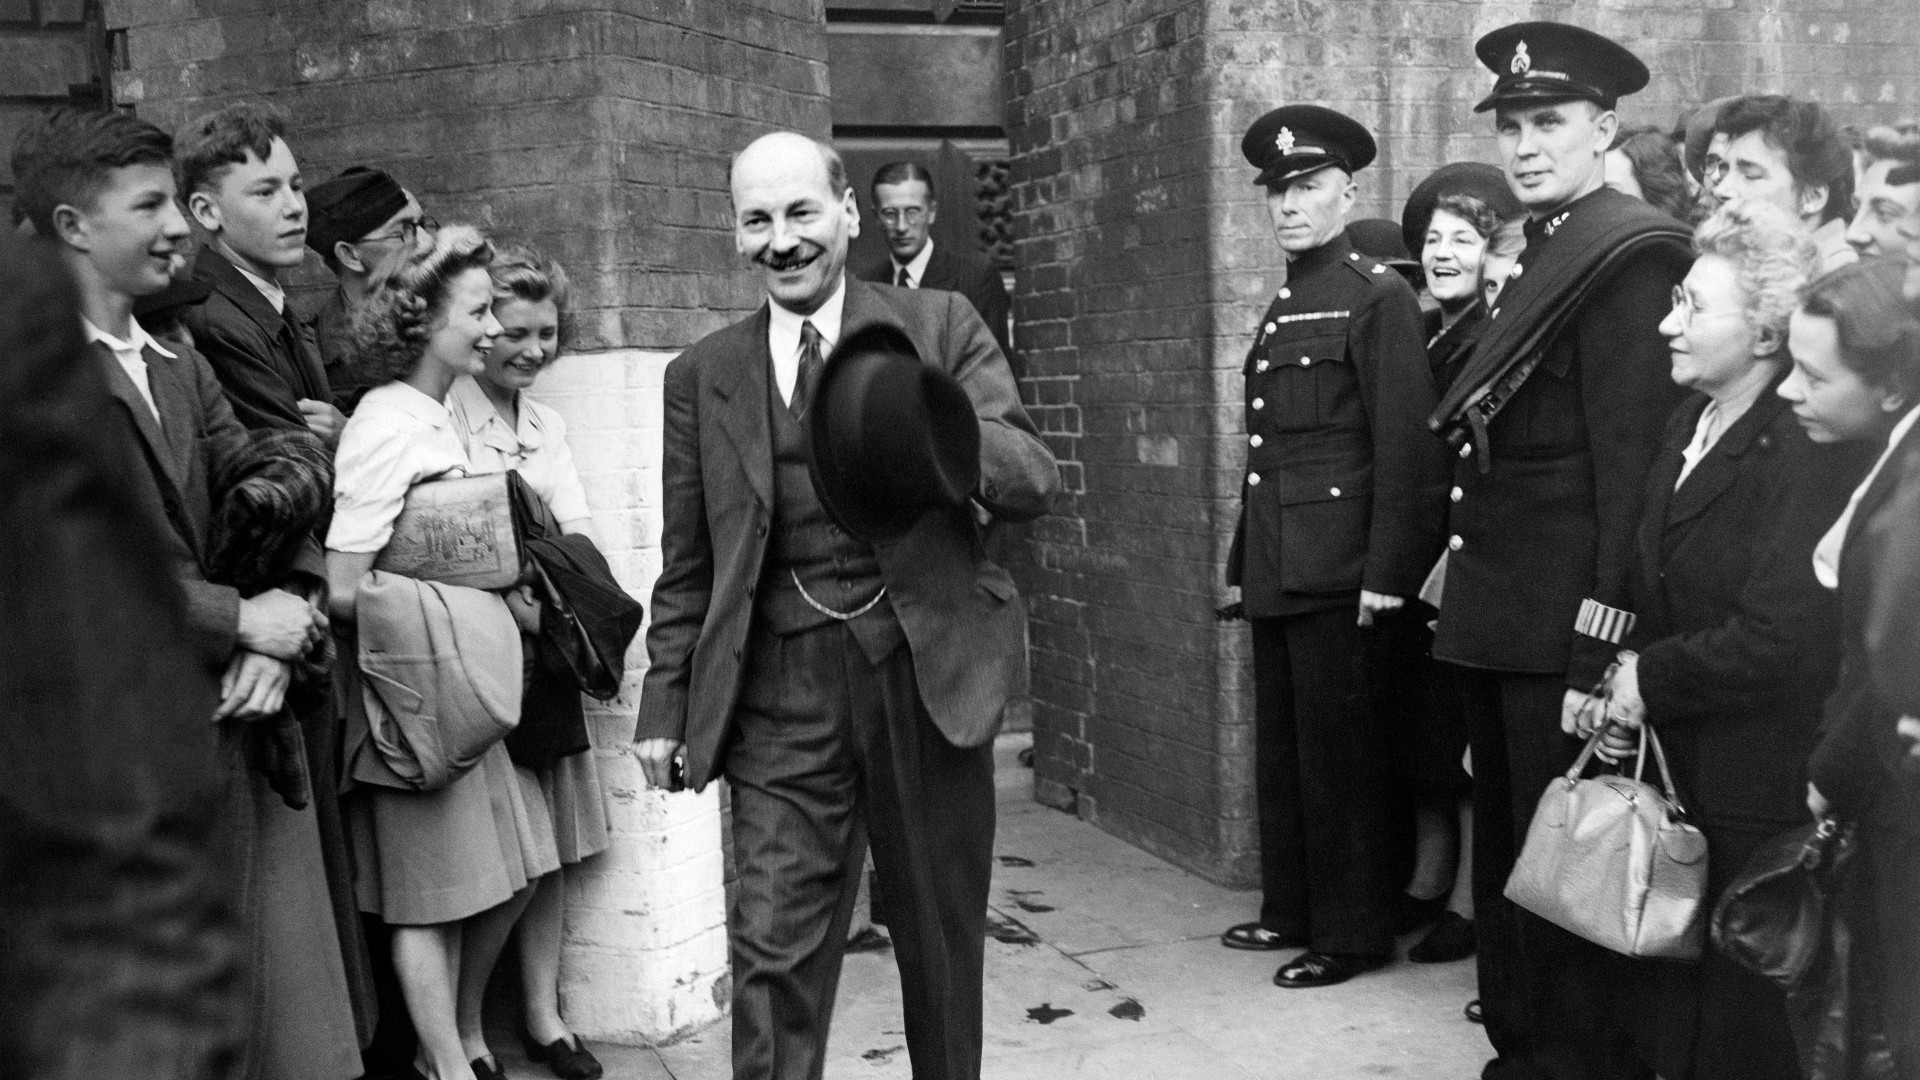 British leader of the Labour Party Clement Attlee leaves the Treasury after a long session on May 27, 1945 in London.